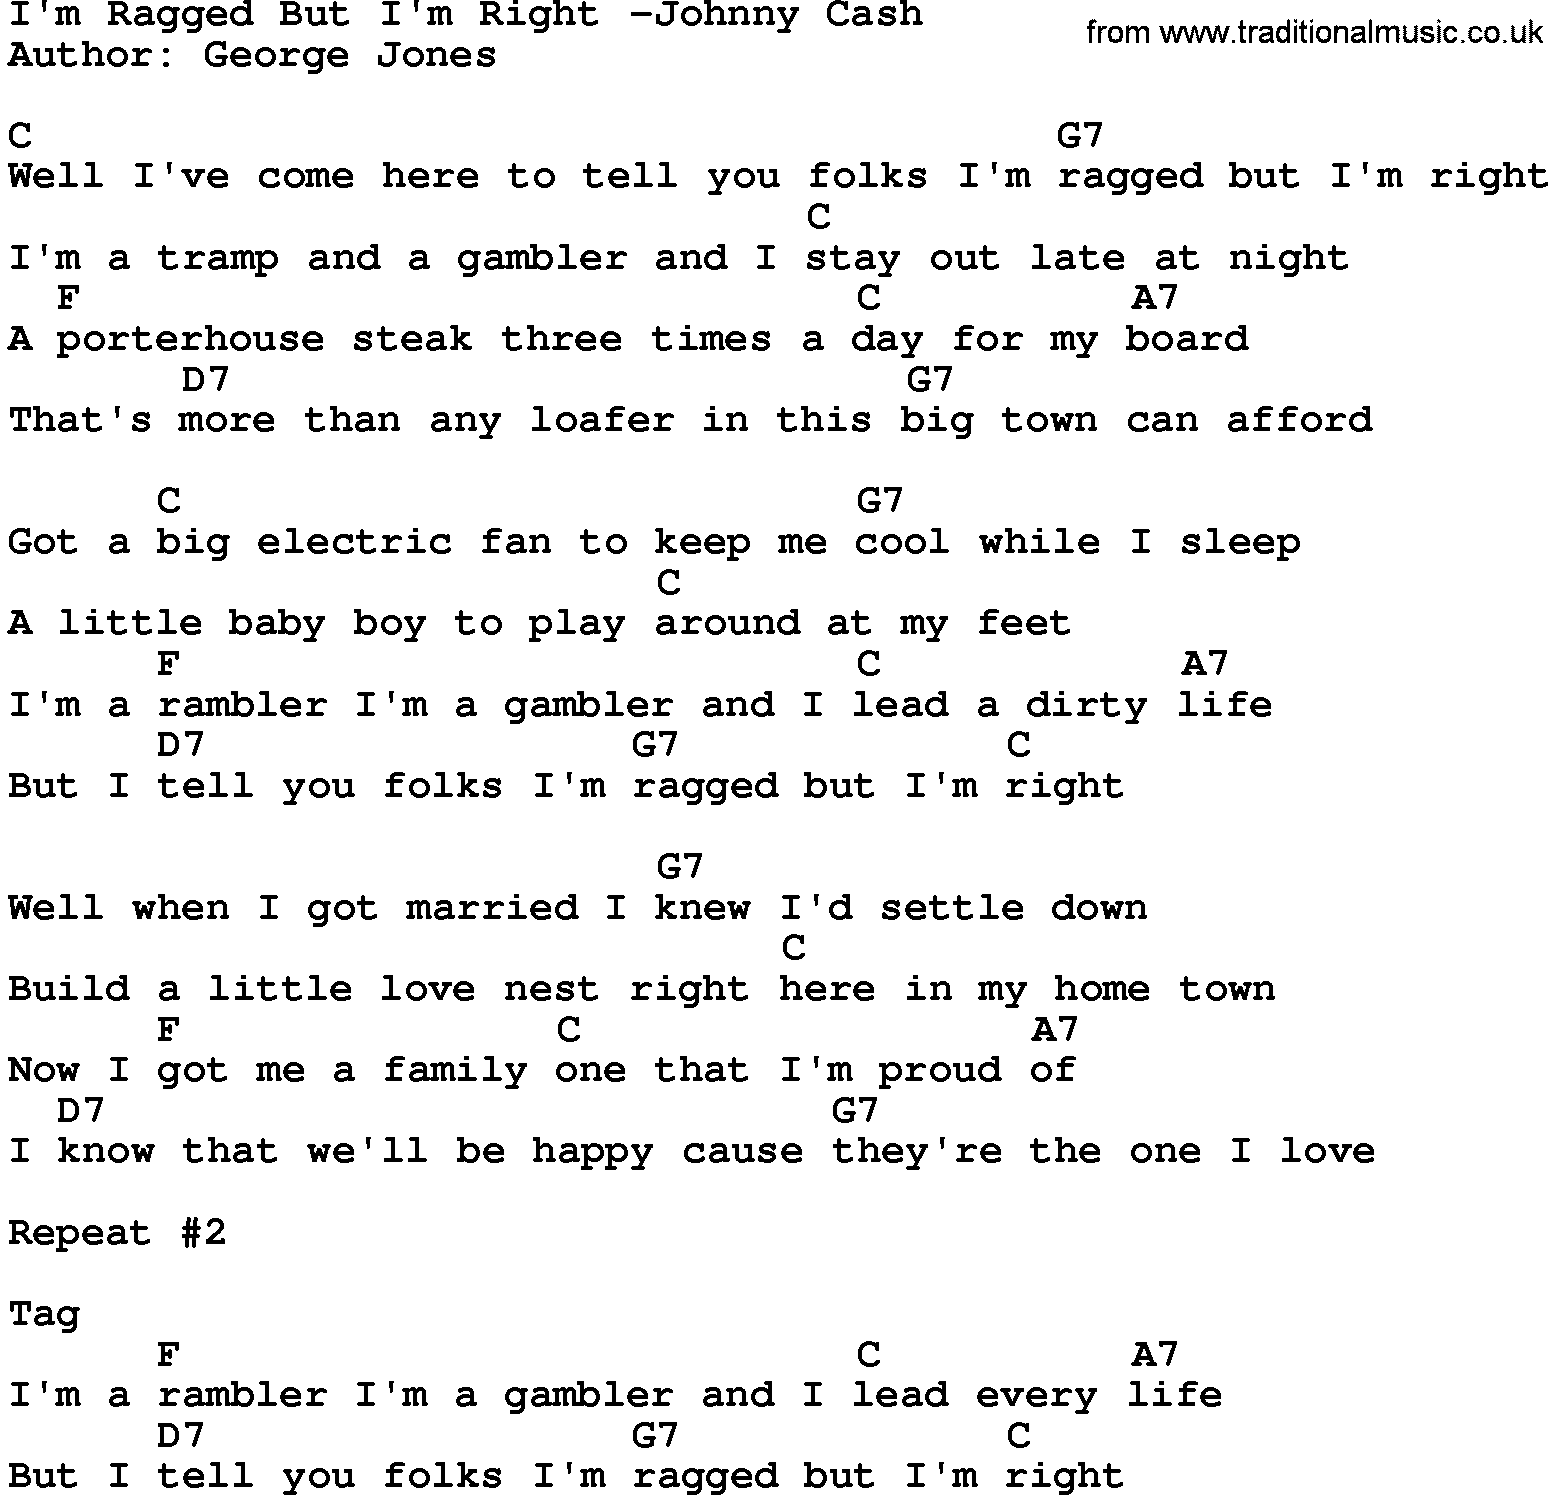 Country music song: I'm Ragged But I'm Right -Johnny Cash lyrics and chords